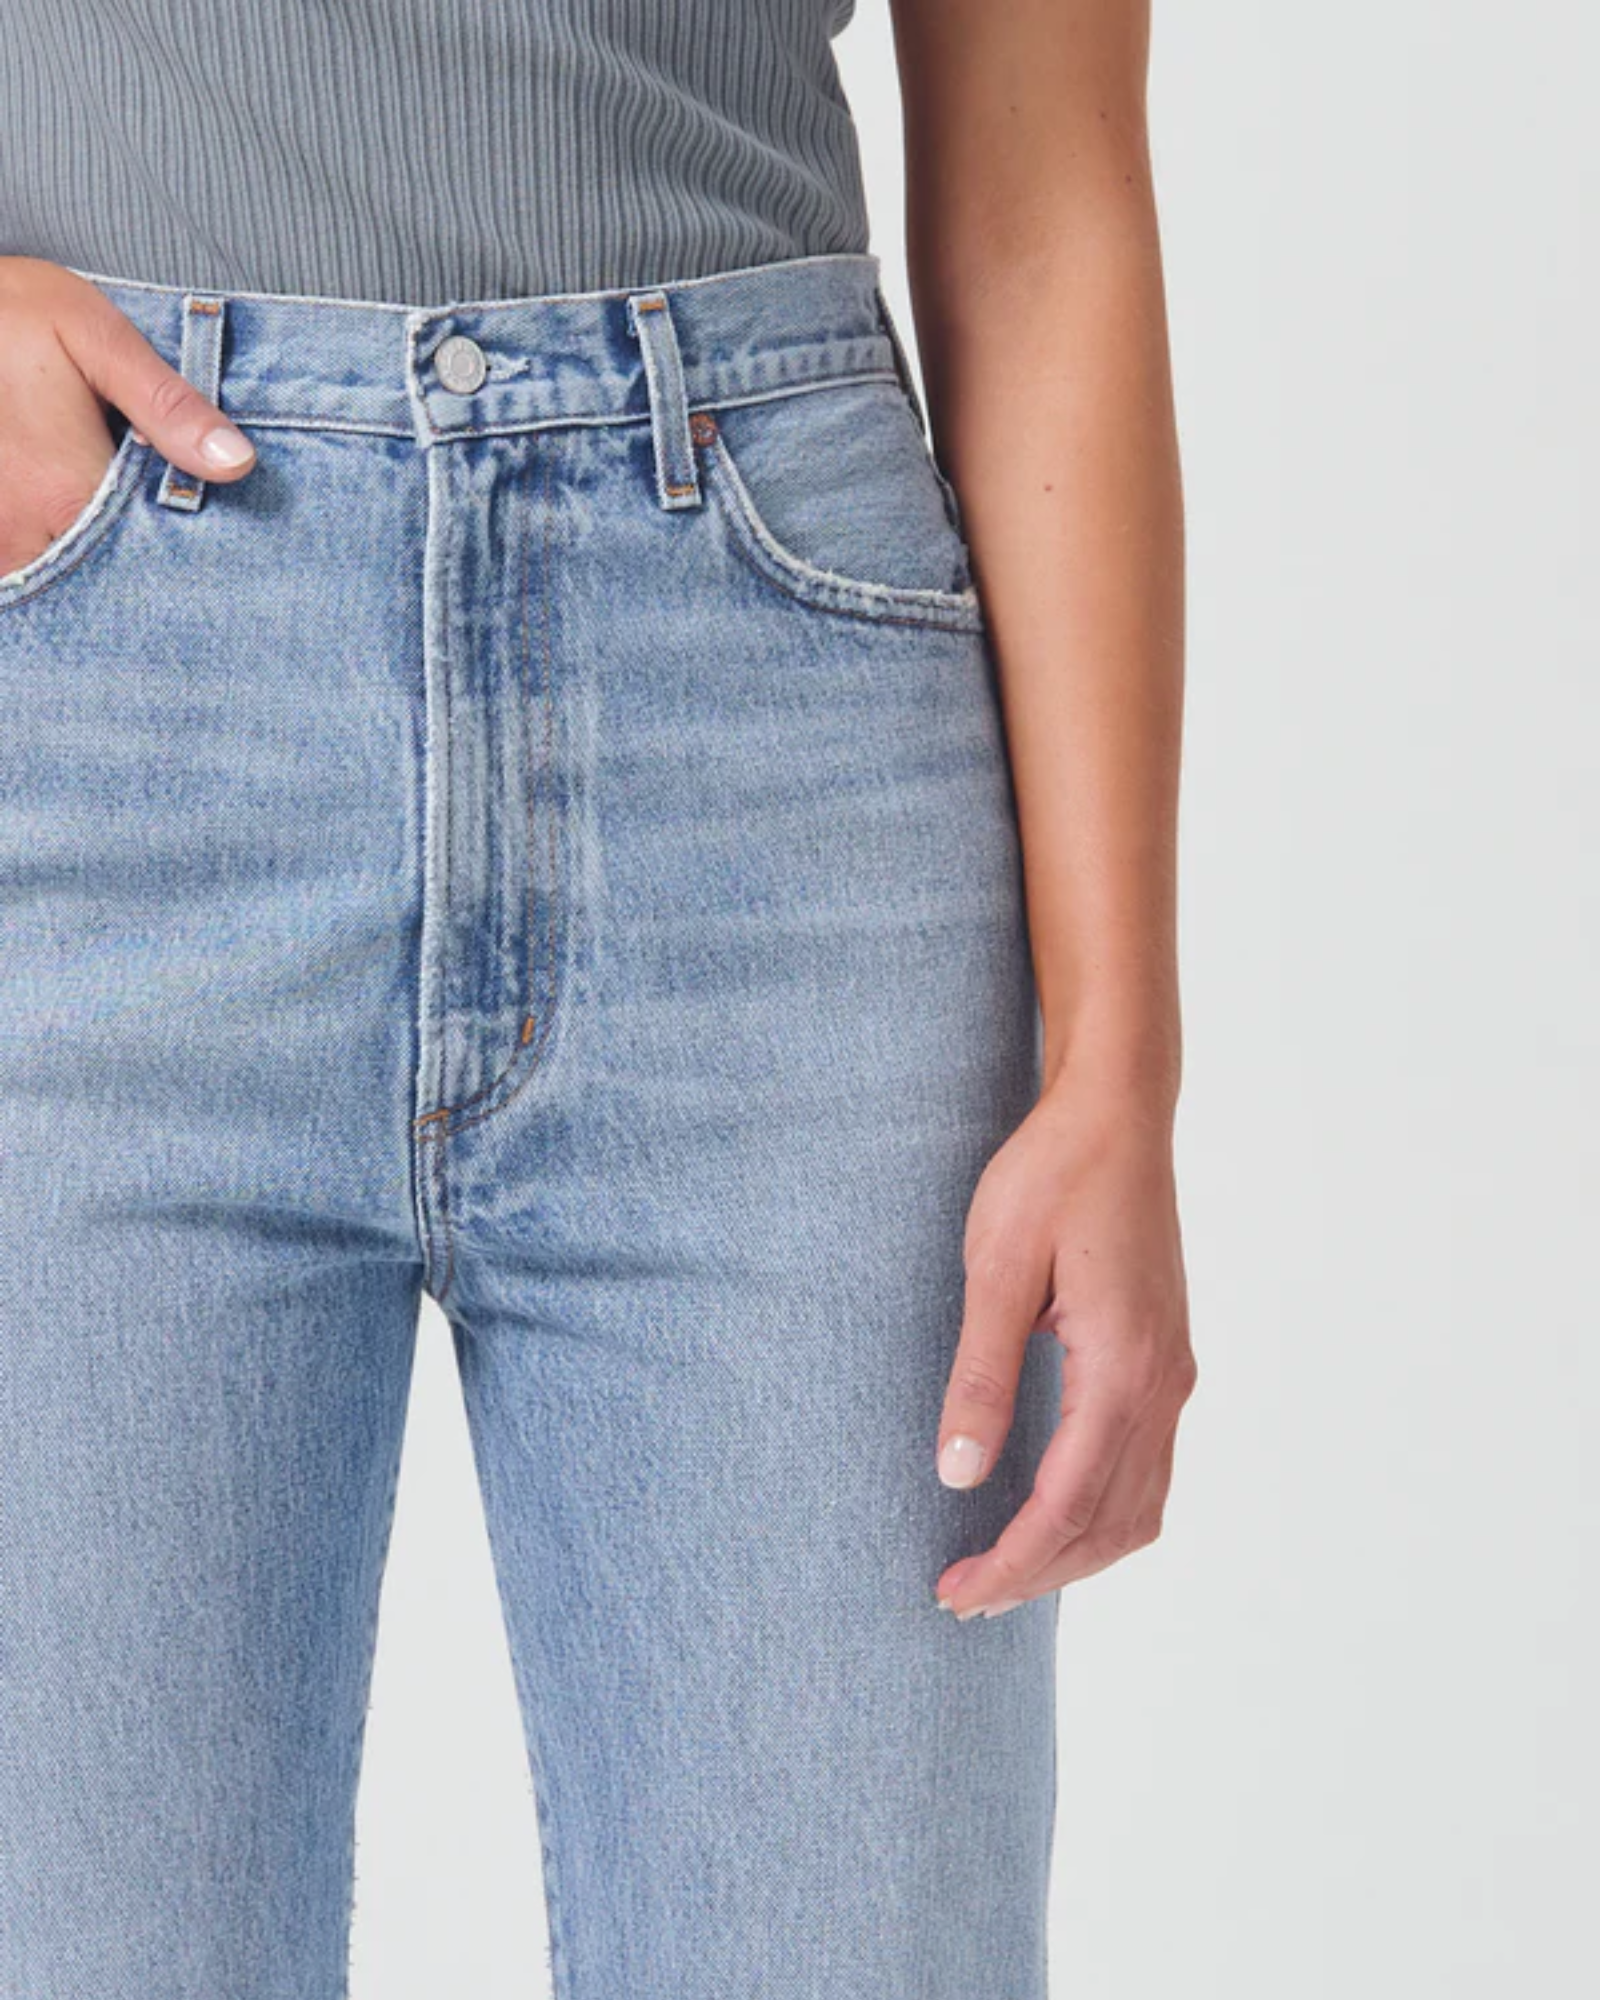 Agolde Pinch Waist Jean in Distract